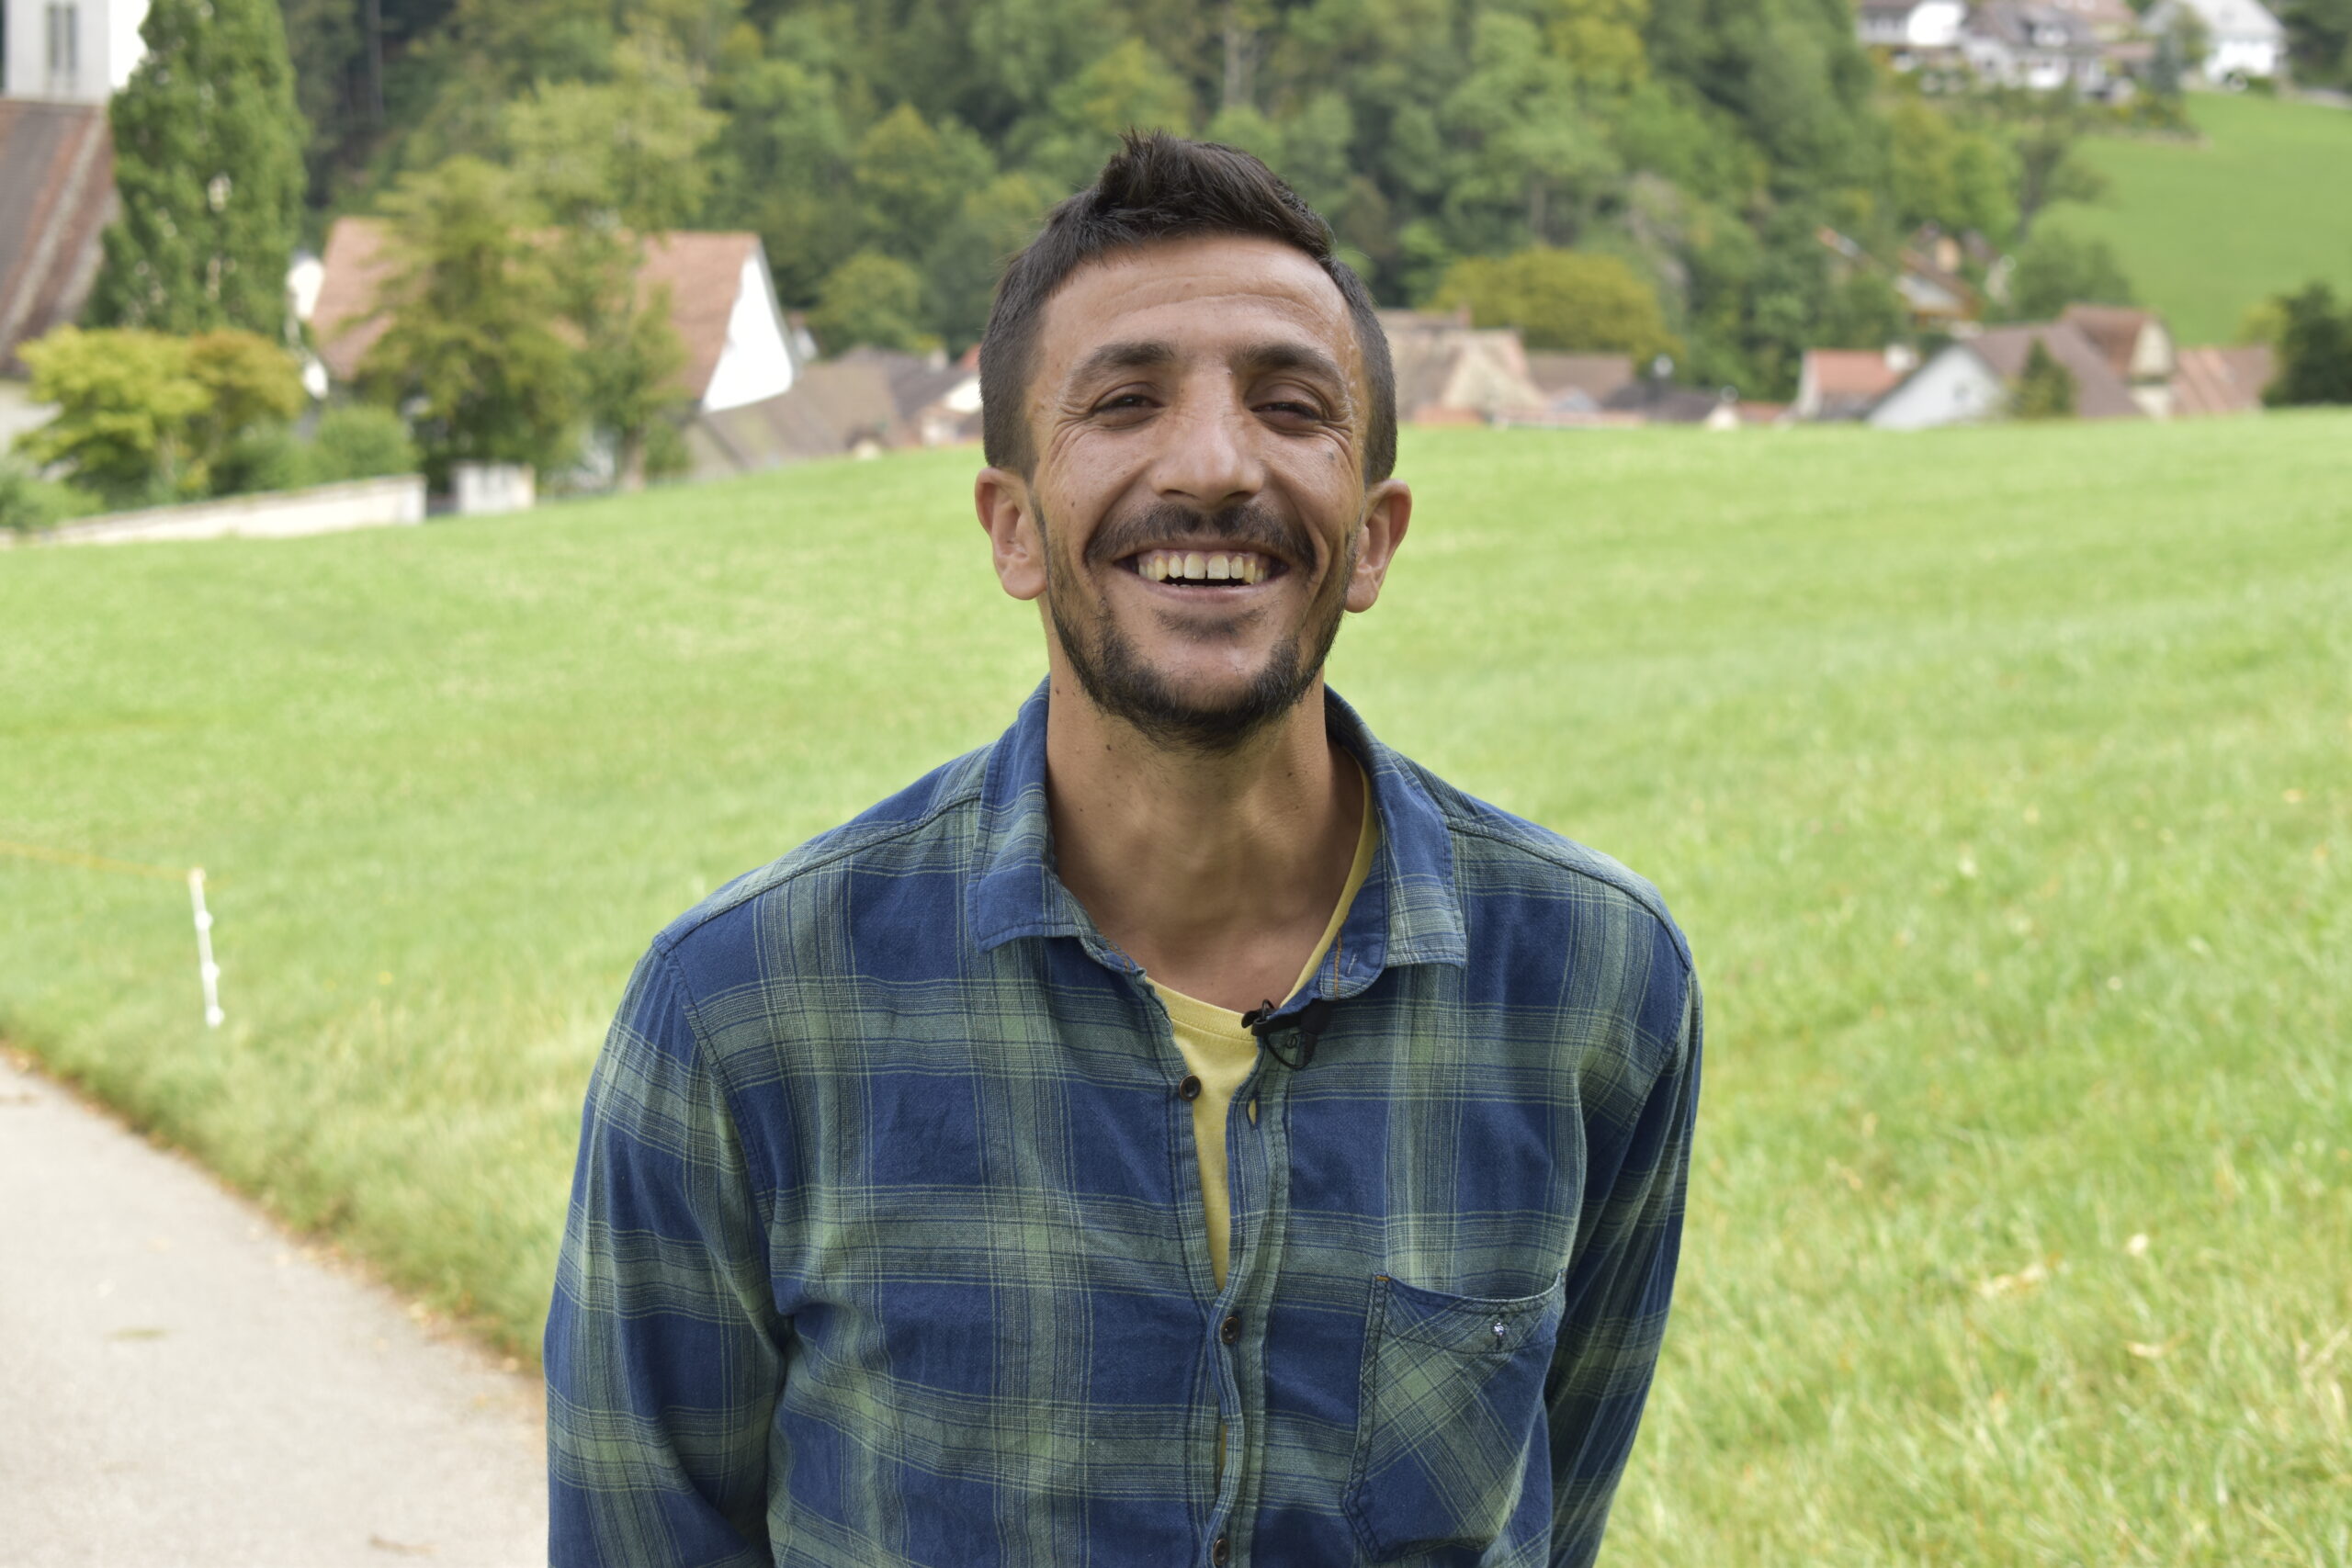 A young man, in a checkered shirt, laughs into the camera, a green meadow behind.